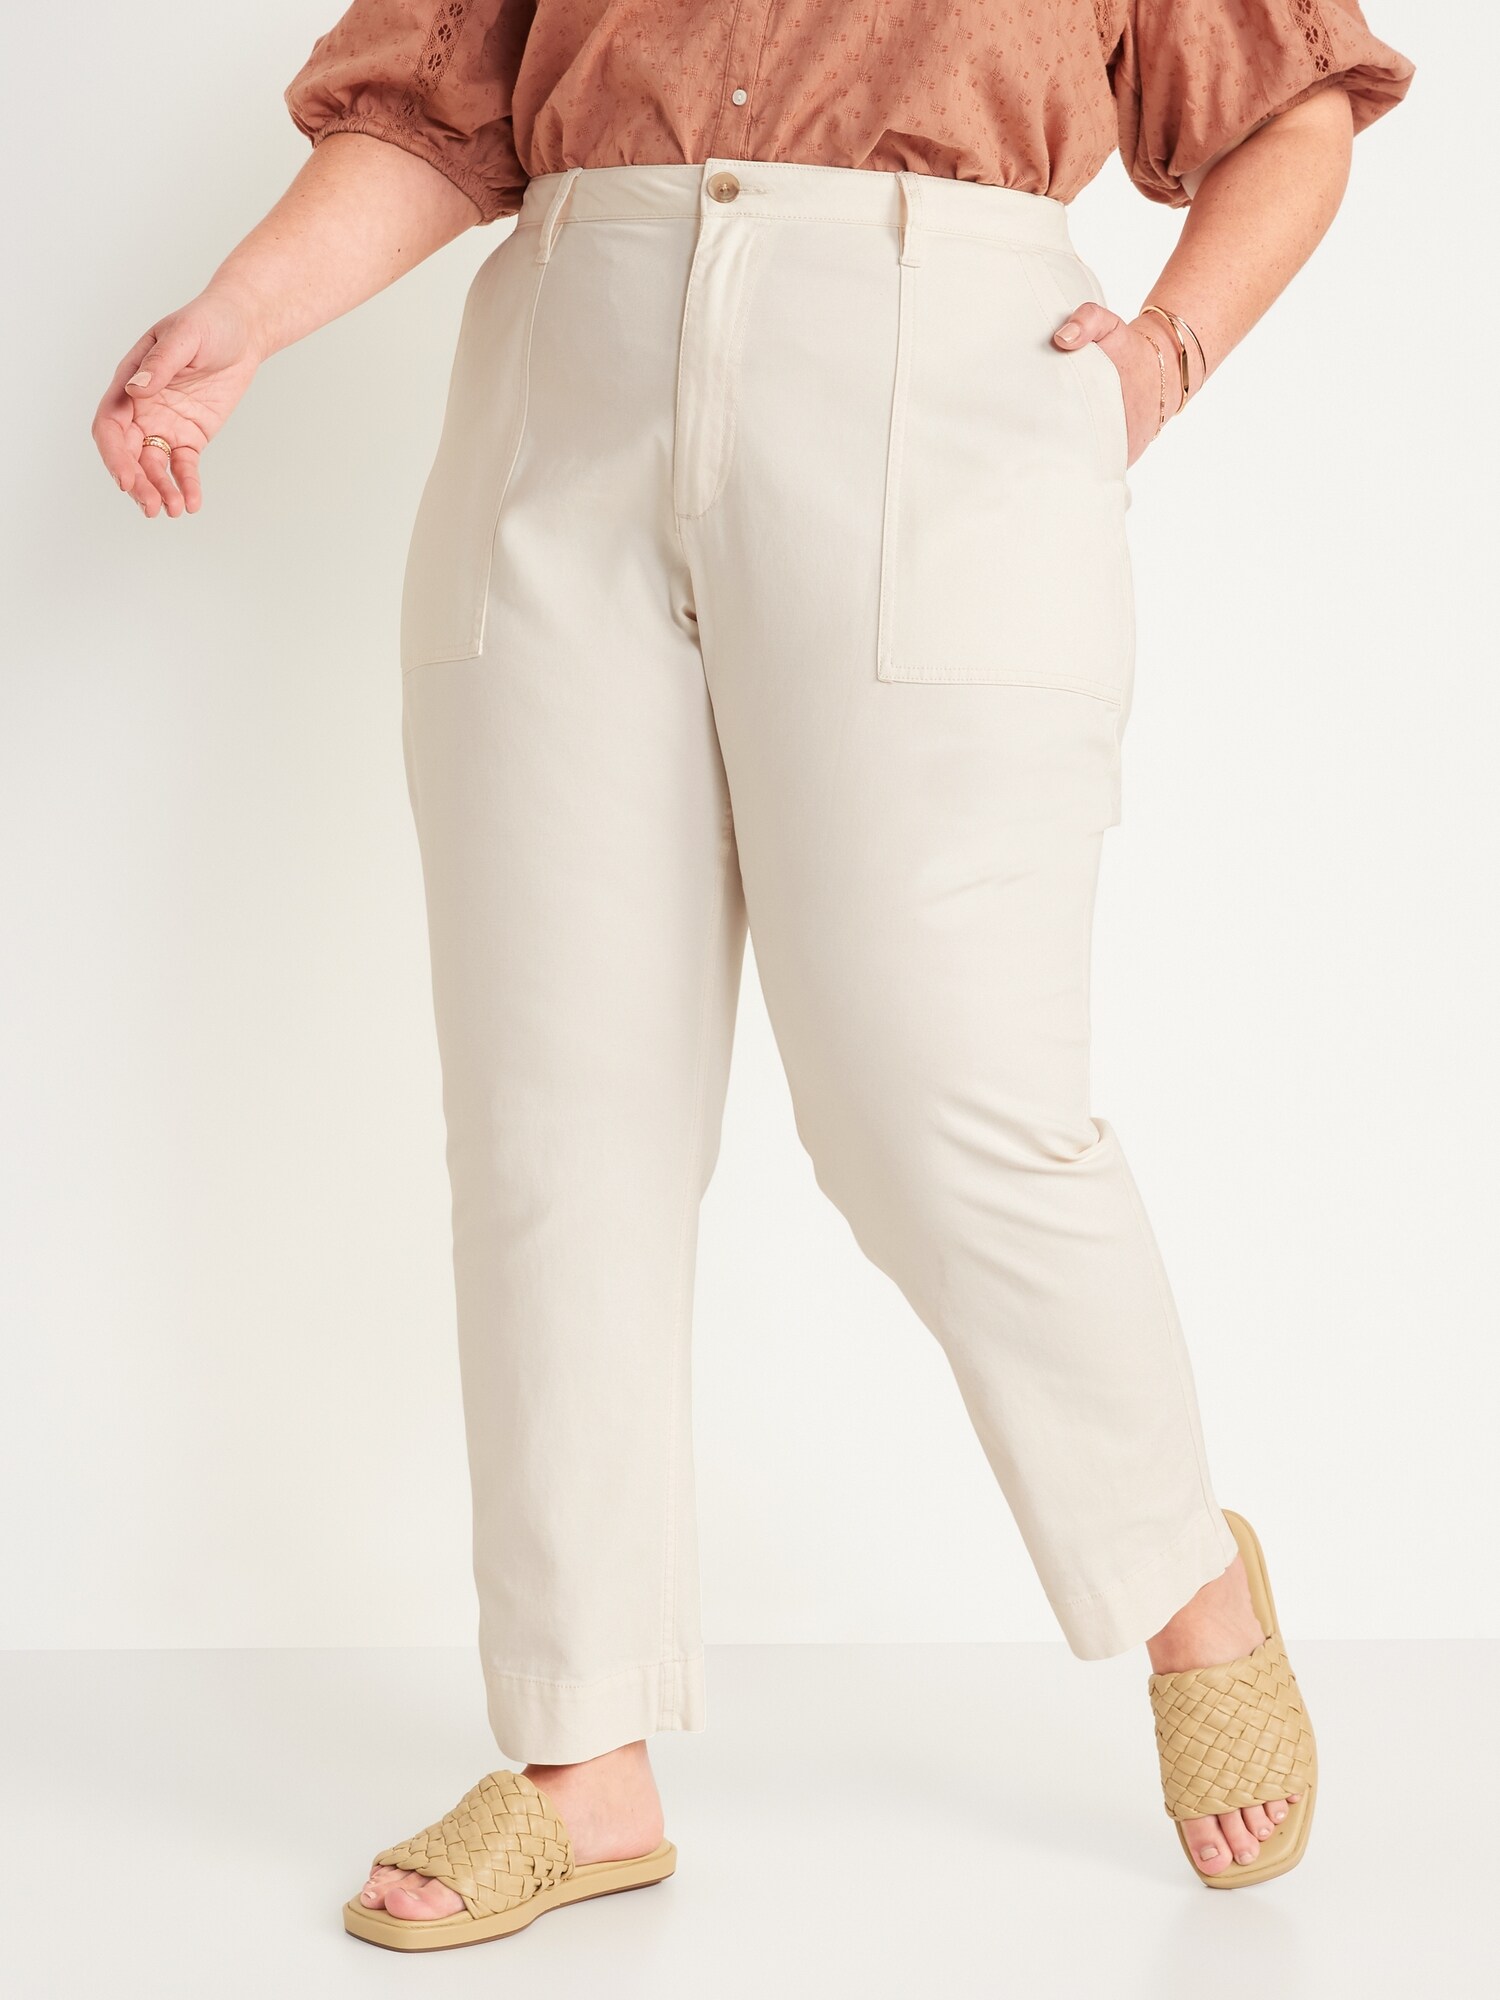 Old Navy Sisal High-Waisted Straight Canvas Workwear Pants Size 30